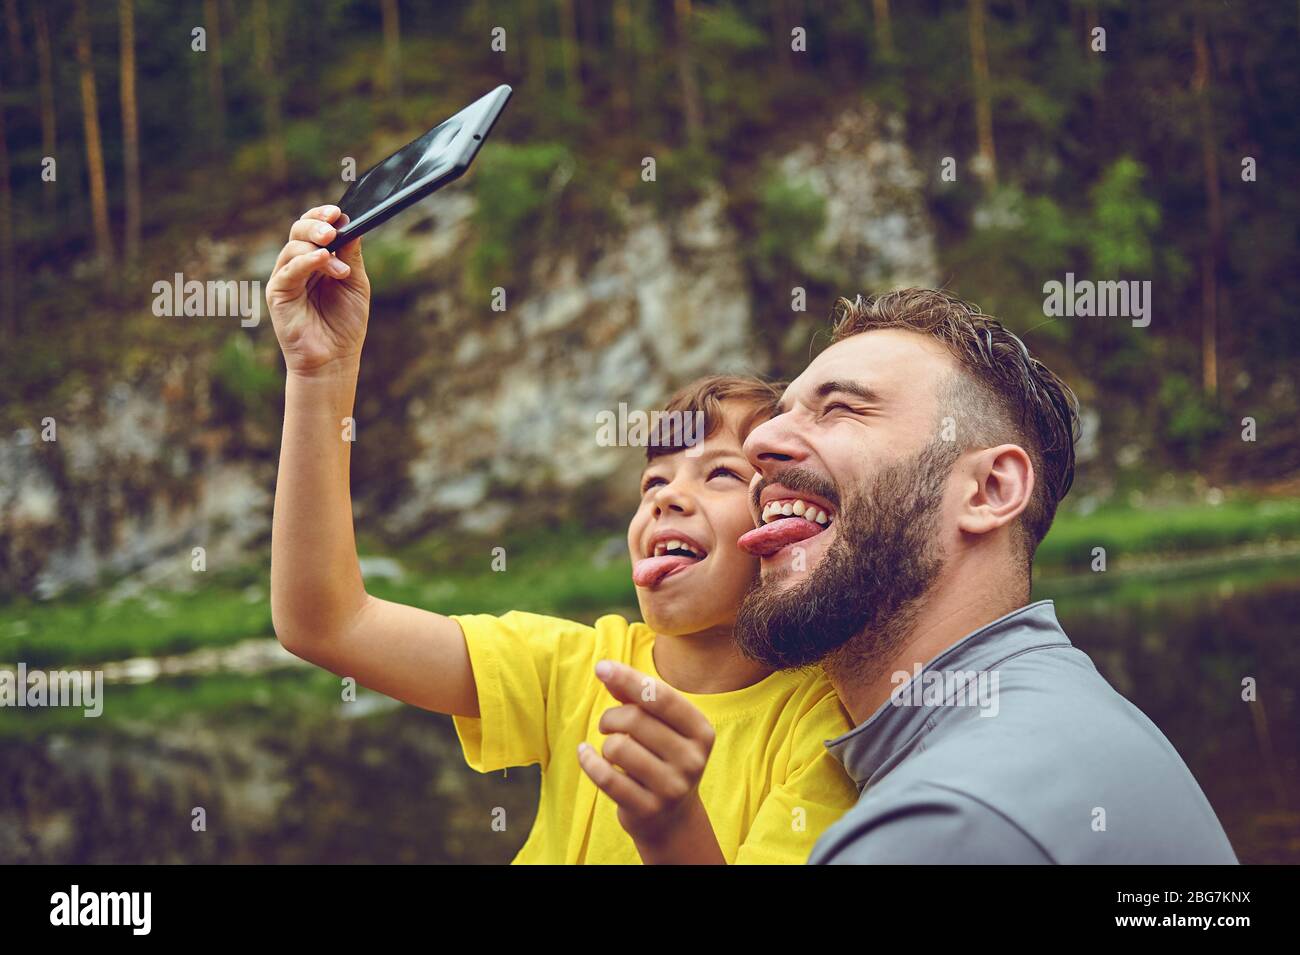 Having fun. Father example of noble human. Taking selfie with son. Child riding on dads shoulders. Happiness being father of boy. Stock Photo